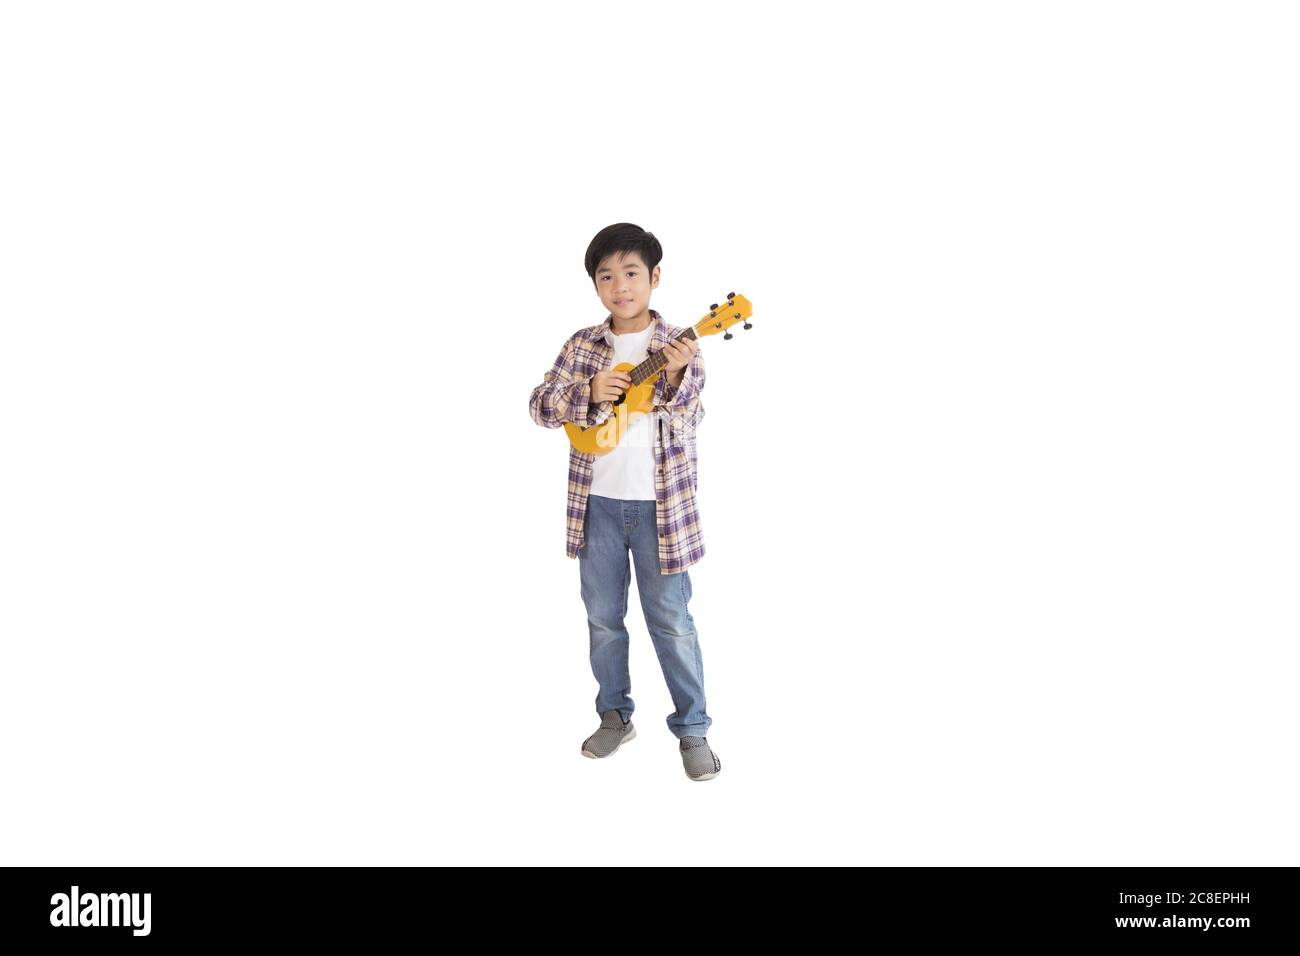 A portrait of a cute Asian elementary school student wearing jeans and wearing a plaid shirt holding a ukulele. An isolated image with white backgroun Stock Photo